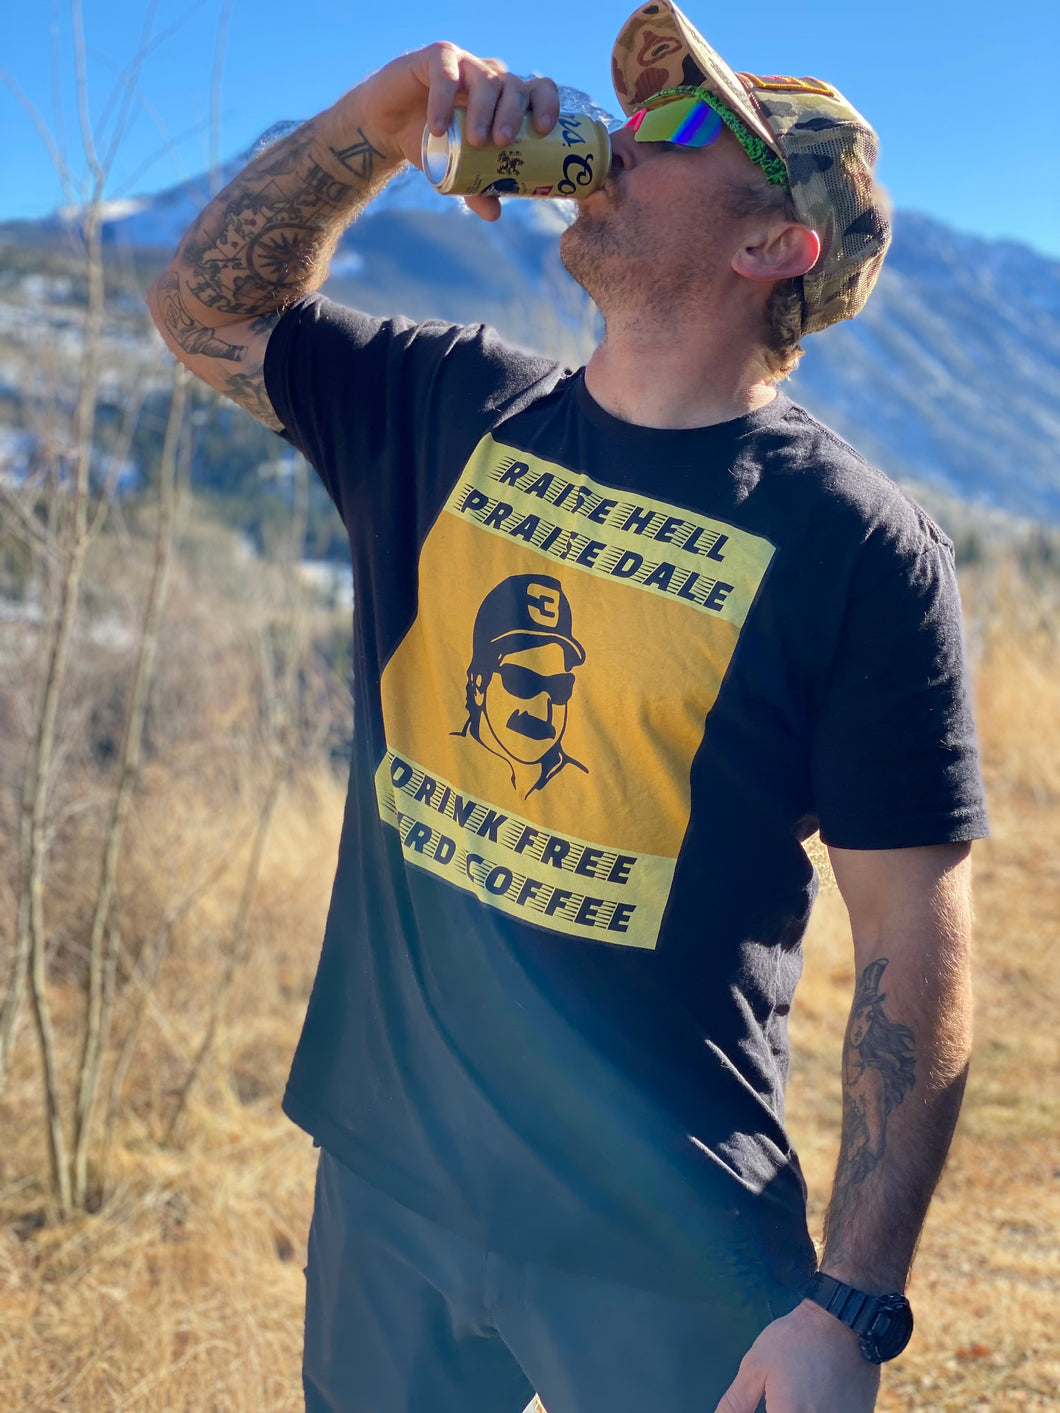 Raise Hell Praise Dale Shirt, Weekend Drinking Shirt, Short sleeve Black shirt with our Raise Hell Praise Dale, Drink Free Bird Coffee, Best Damn Coffee in the World   